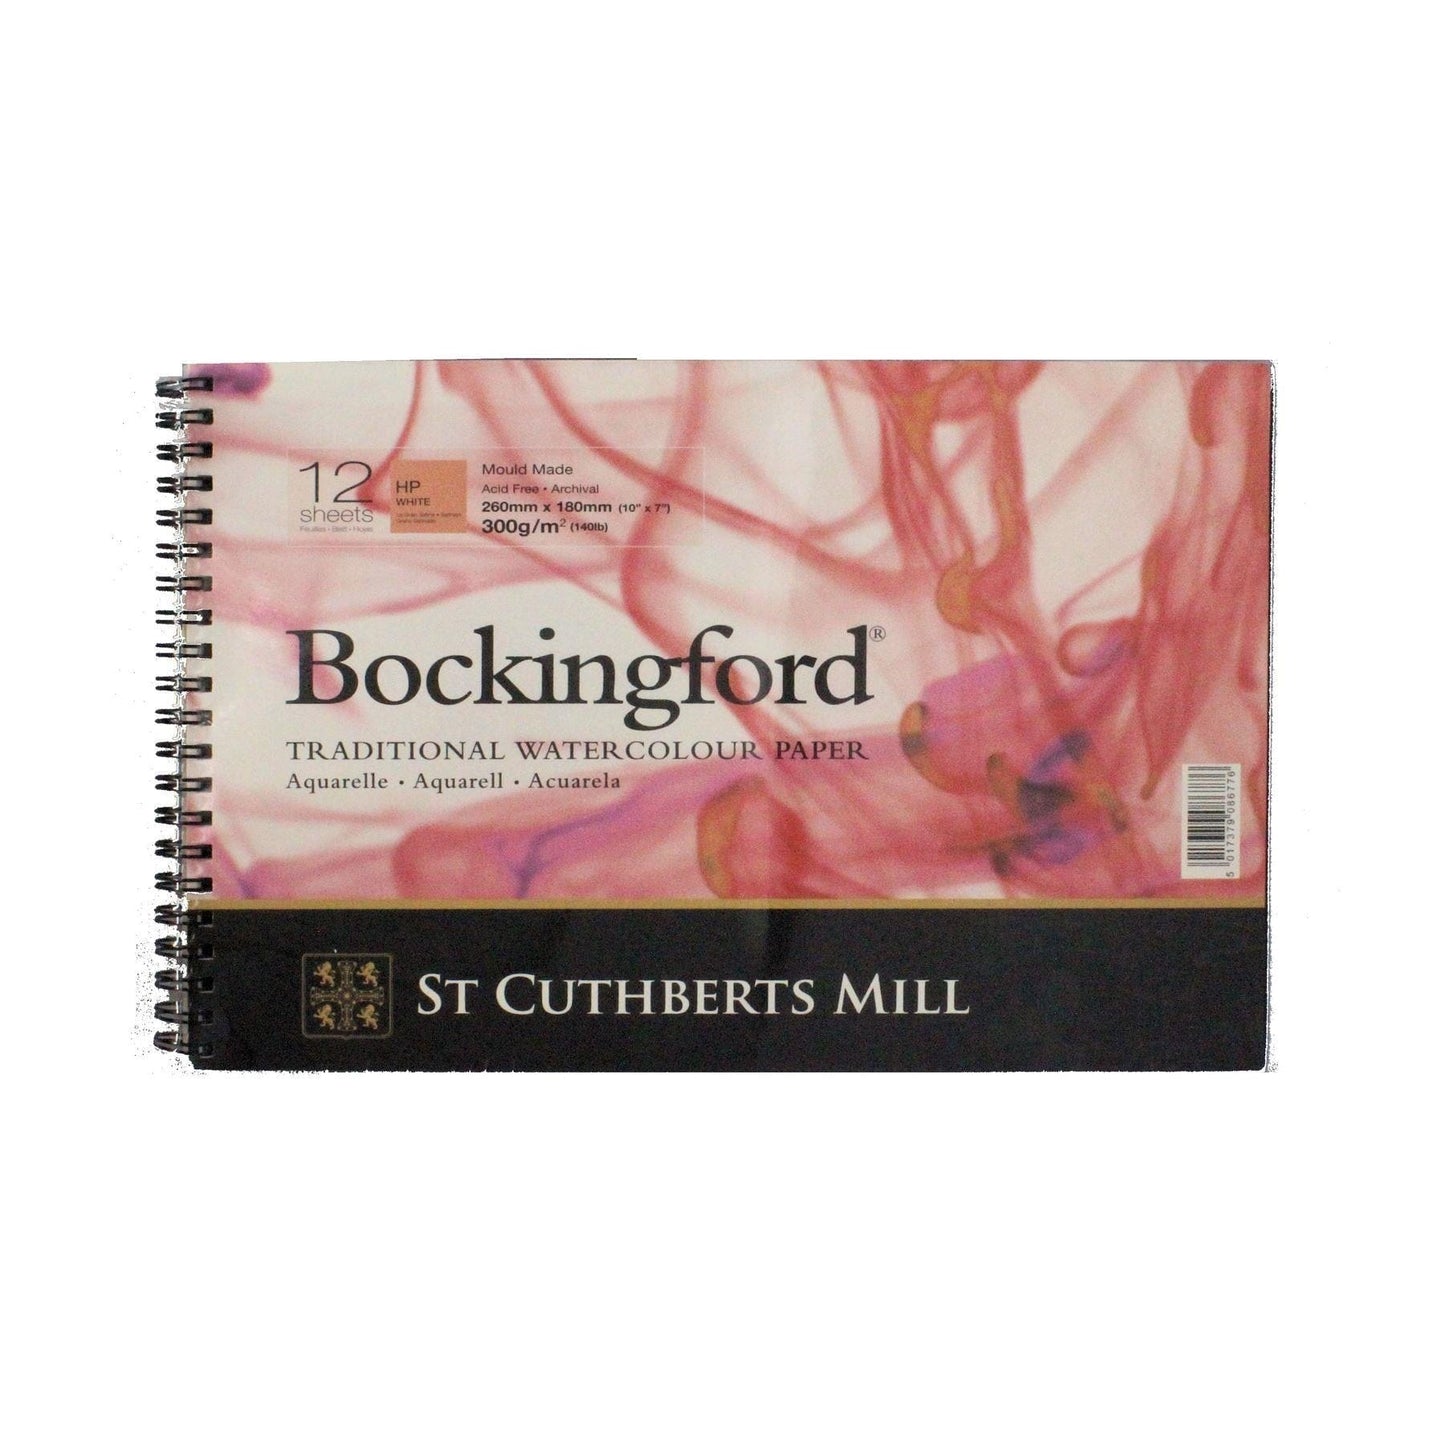  St. Cuthberts Mill Bockingford Watercolor Paper Pad - 12x9-inch  White Water Color Paper for Artists - 12 Sheets of 140lb Hot Press  Watercolor Paper for Gouache Ink Acrylic Charcoal and More